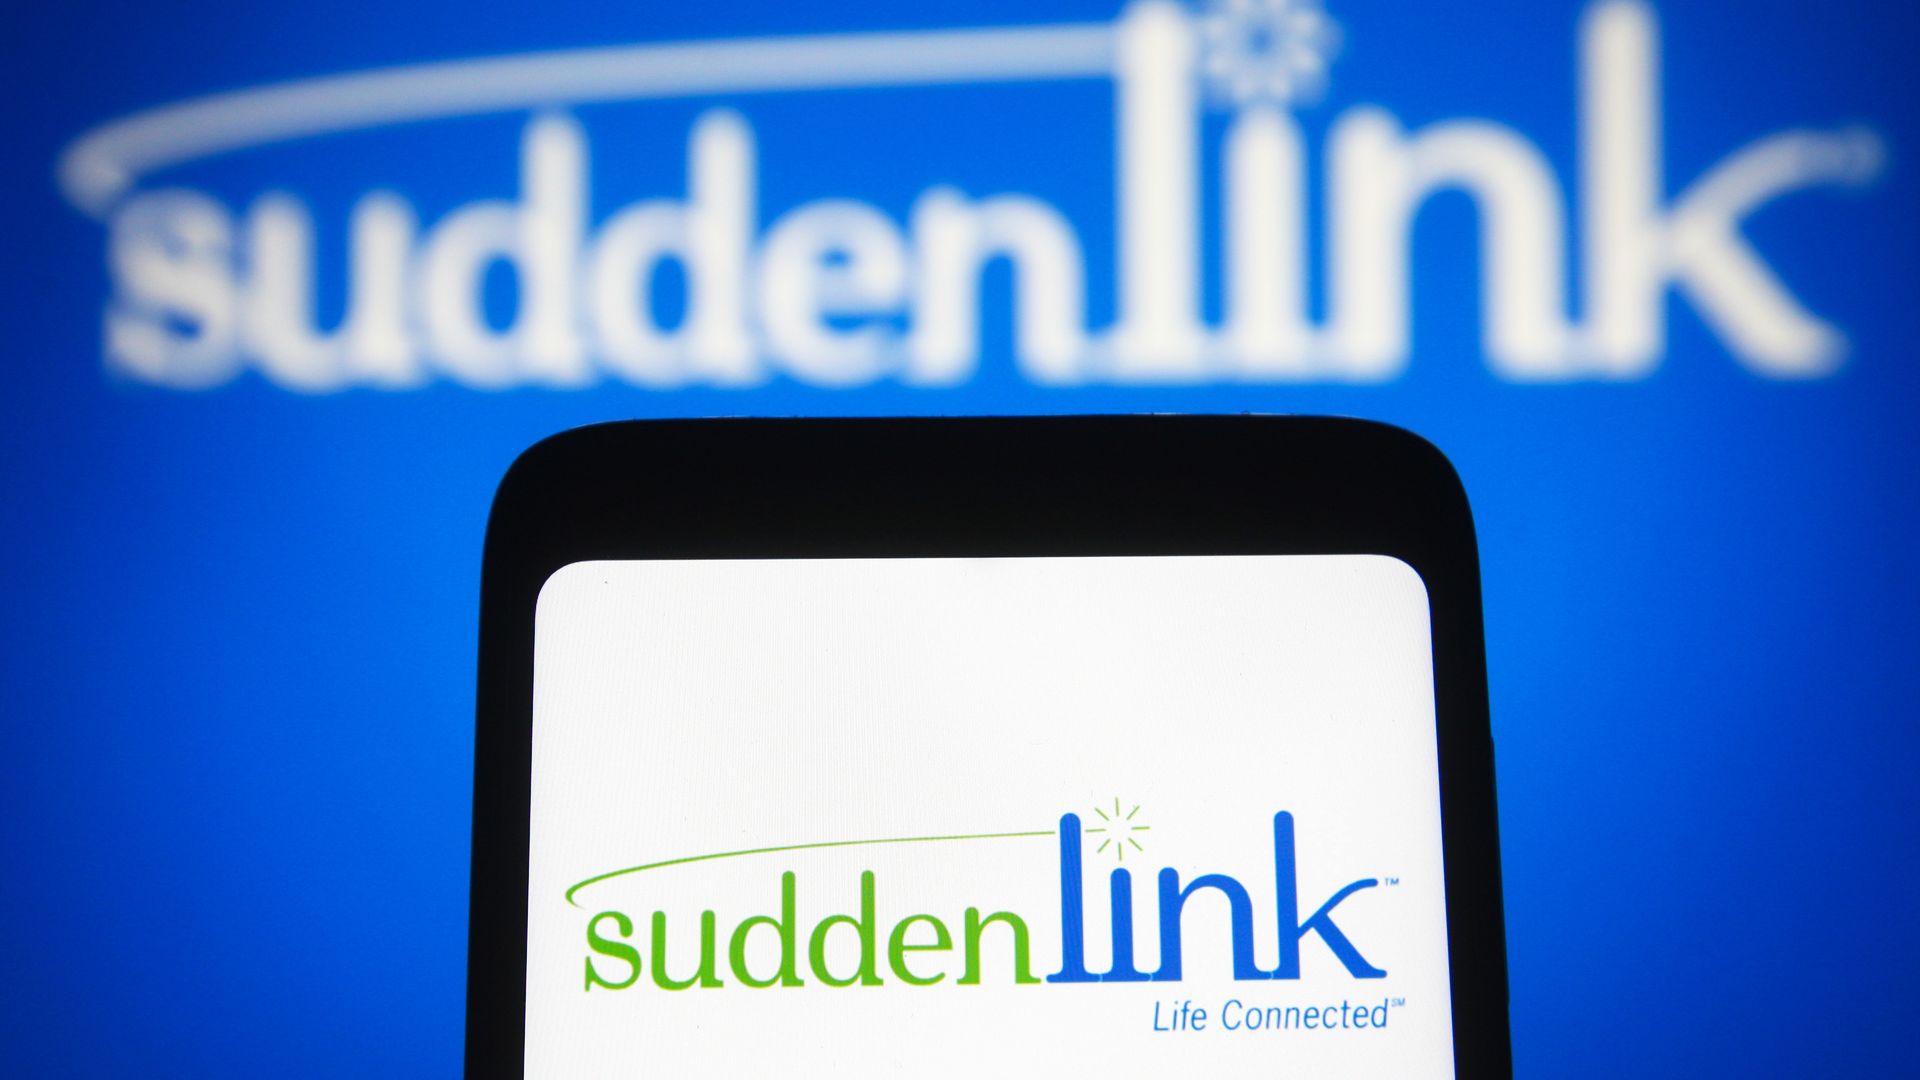 In this photo illustration, the Suddenlink Communications logo is seen displayed on a smartphone screen and in the background.